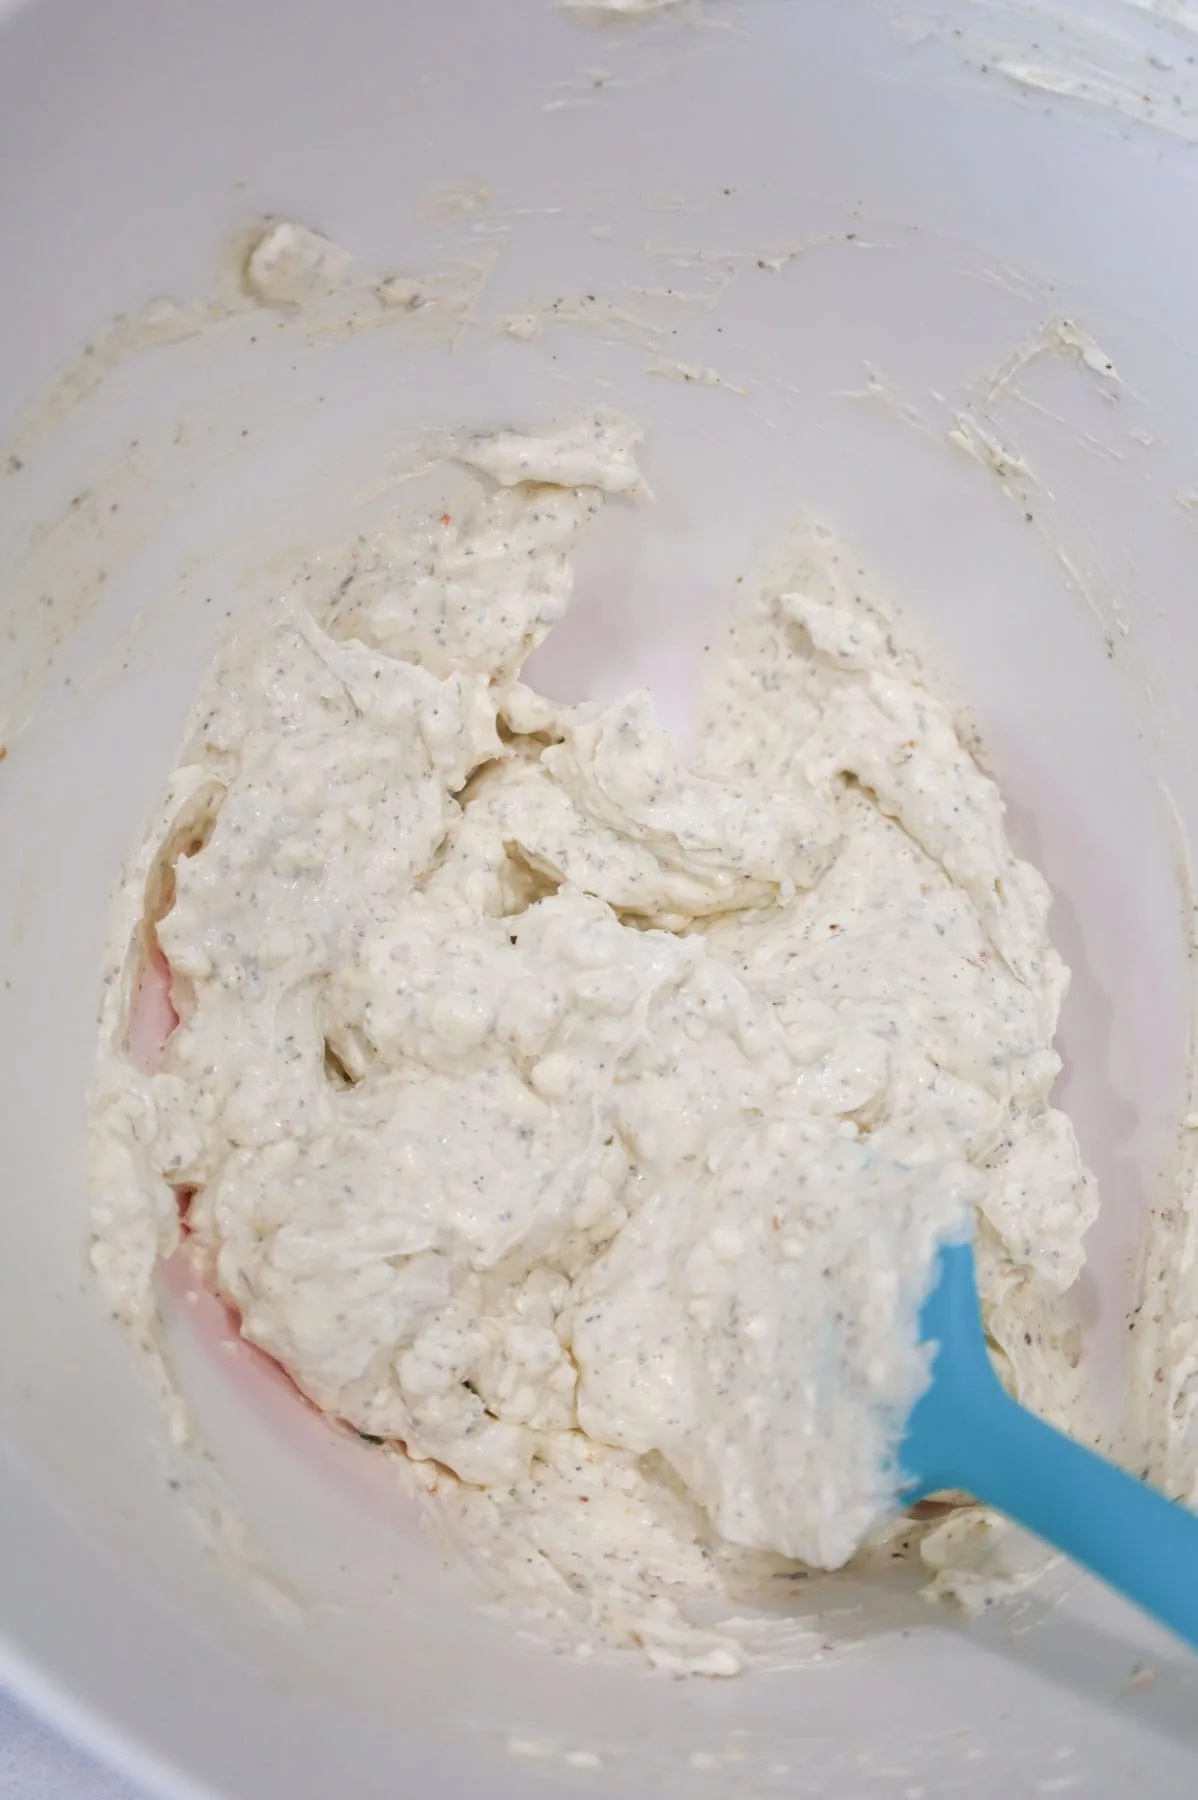 sour cream, cream cheese and sour cream mixture in a mixing bowl